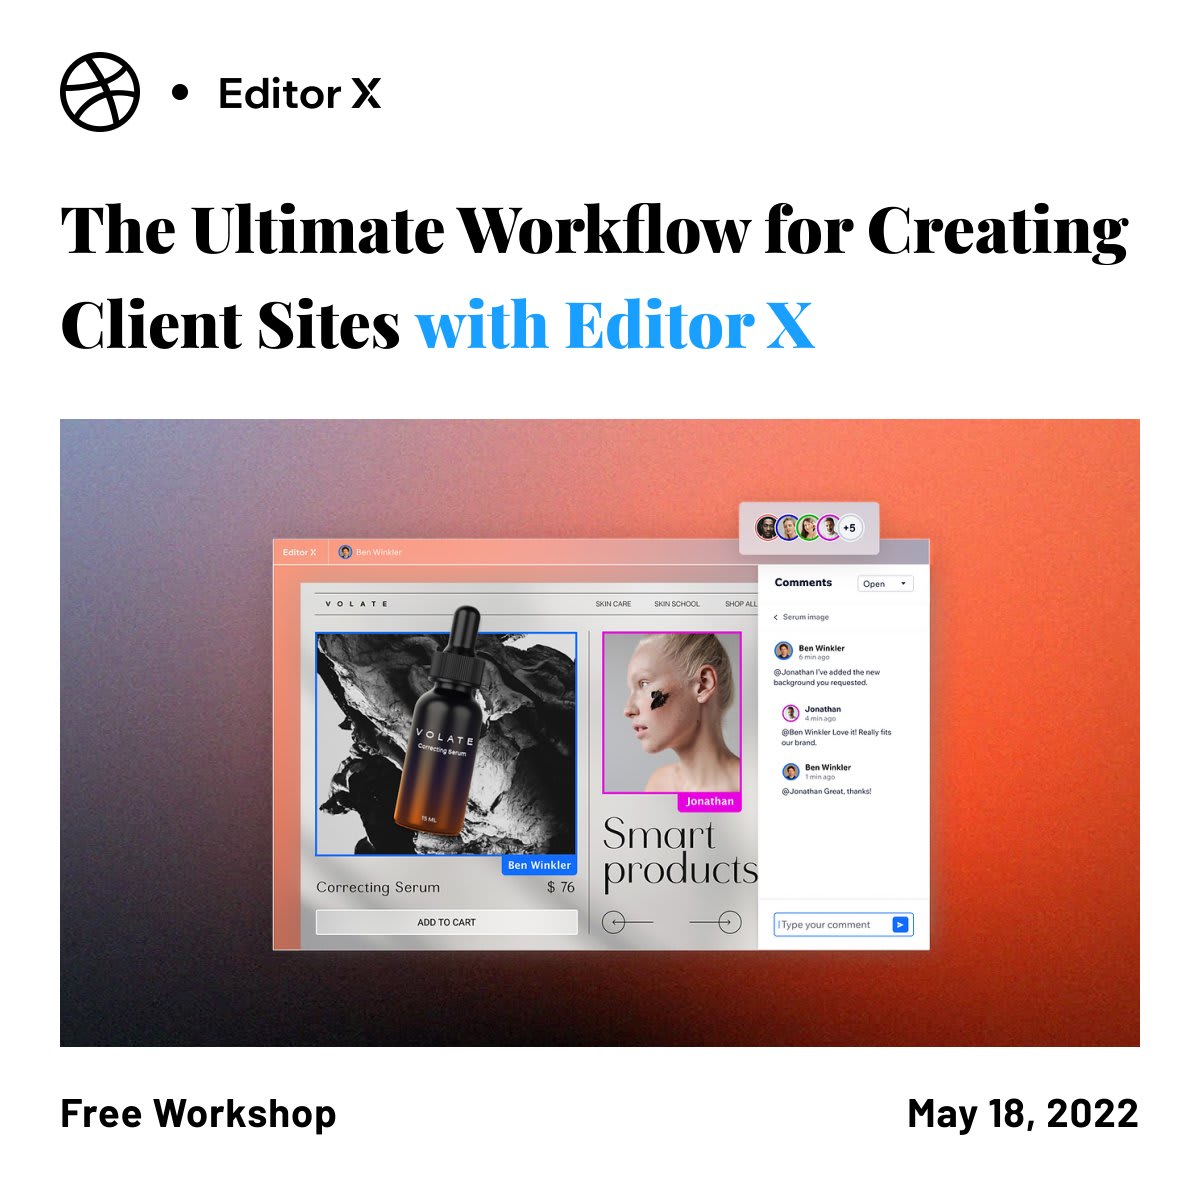 Workshop @EditorX and Dribbble are joining forces with the acclaimed web designer and agency founder, Michael Janda (@morejanda). Discover how to execute profitable website projects that delight your clients every step of the way! ✨